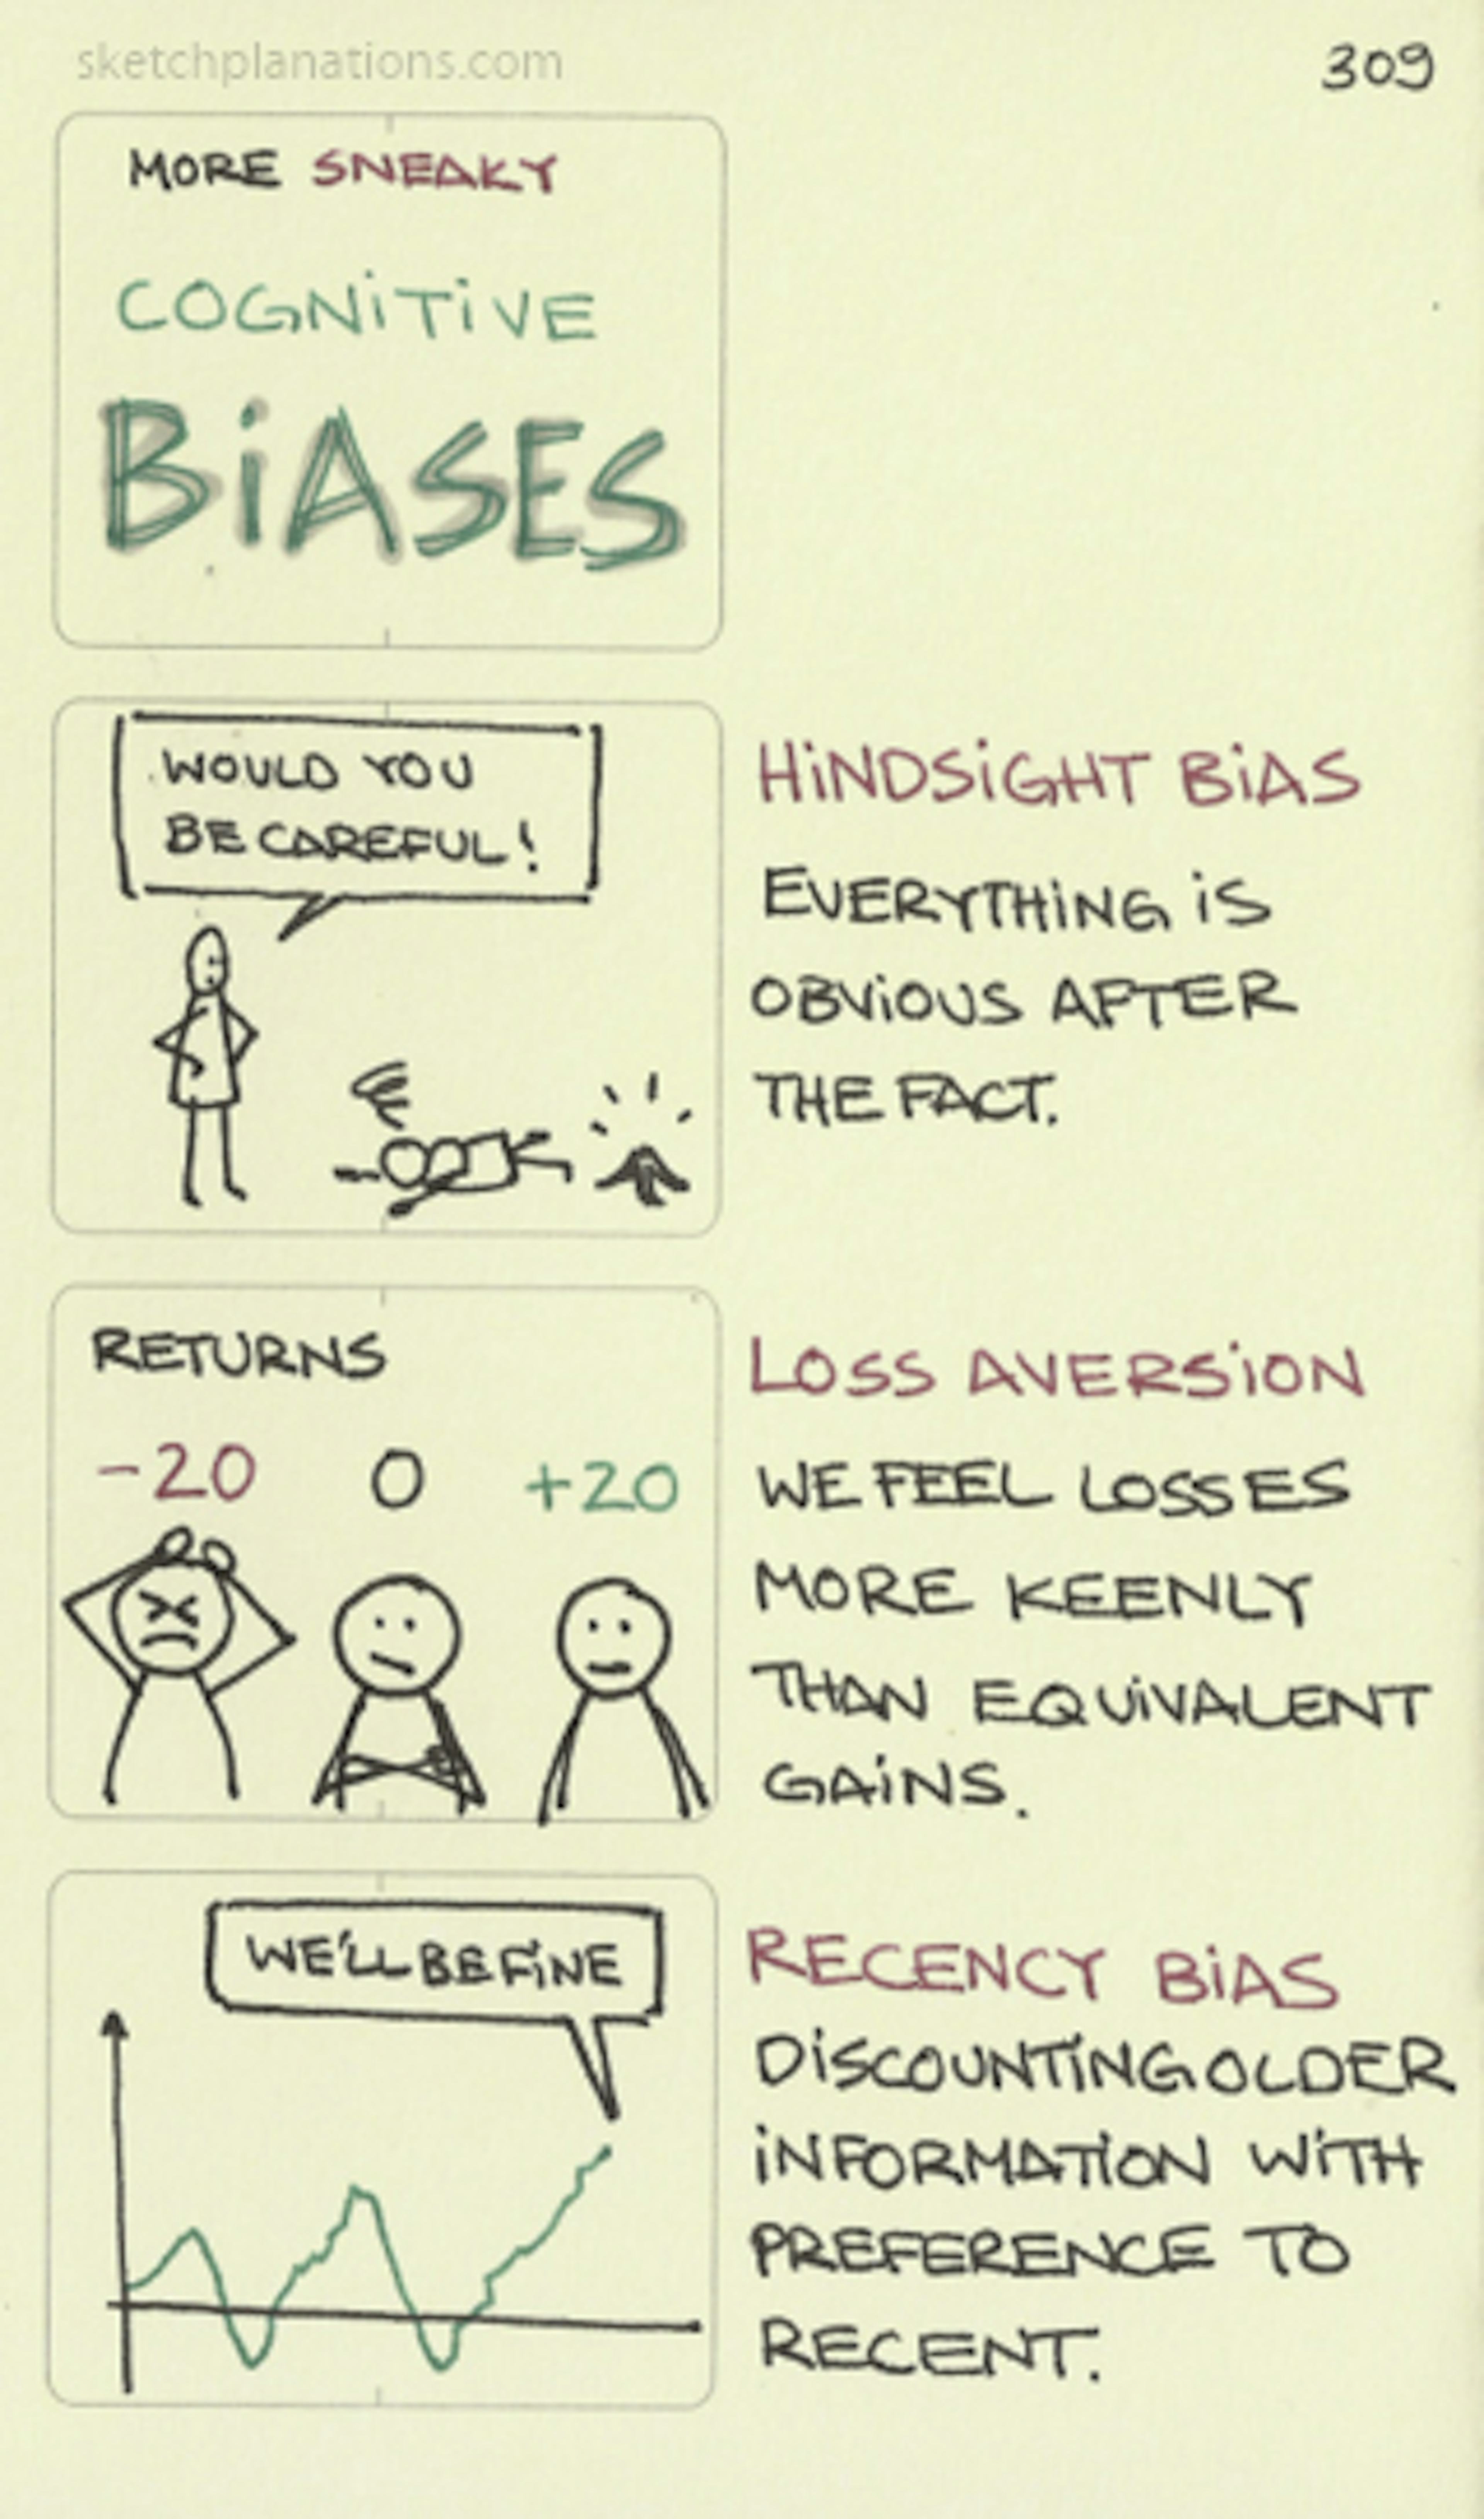 Sneaky cognitive biases: hindsight bias, loss aversion, recency bias - Sketchplanations